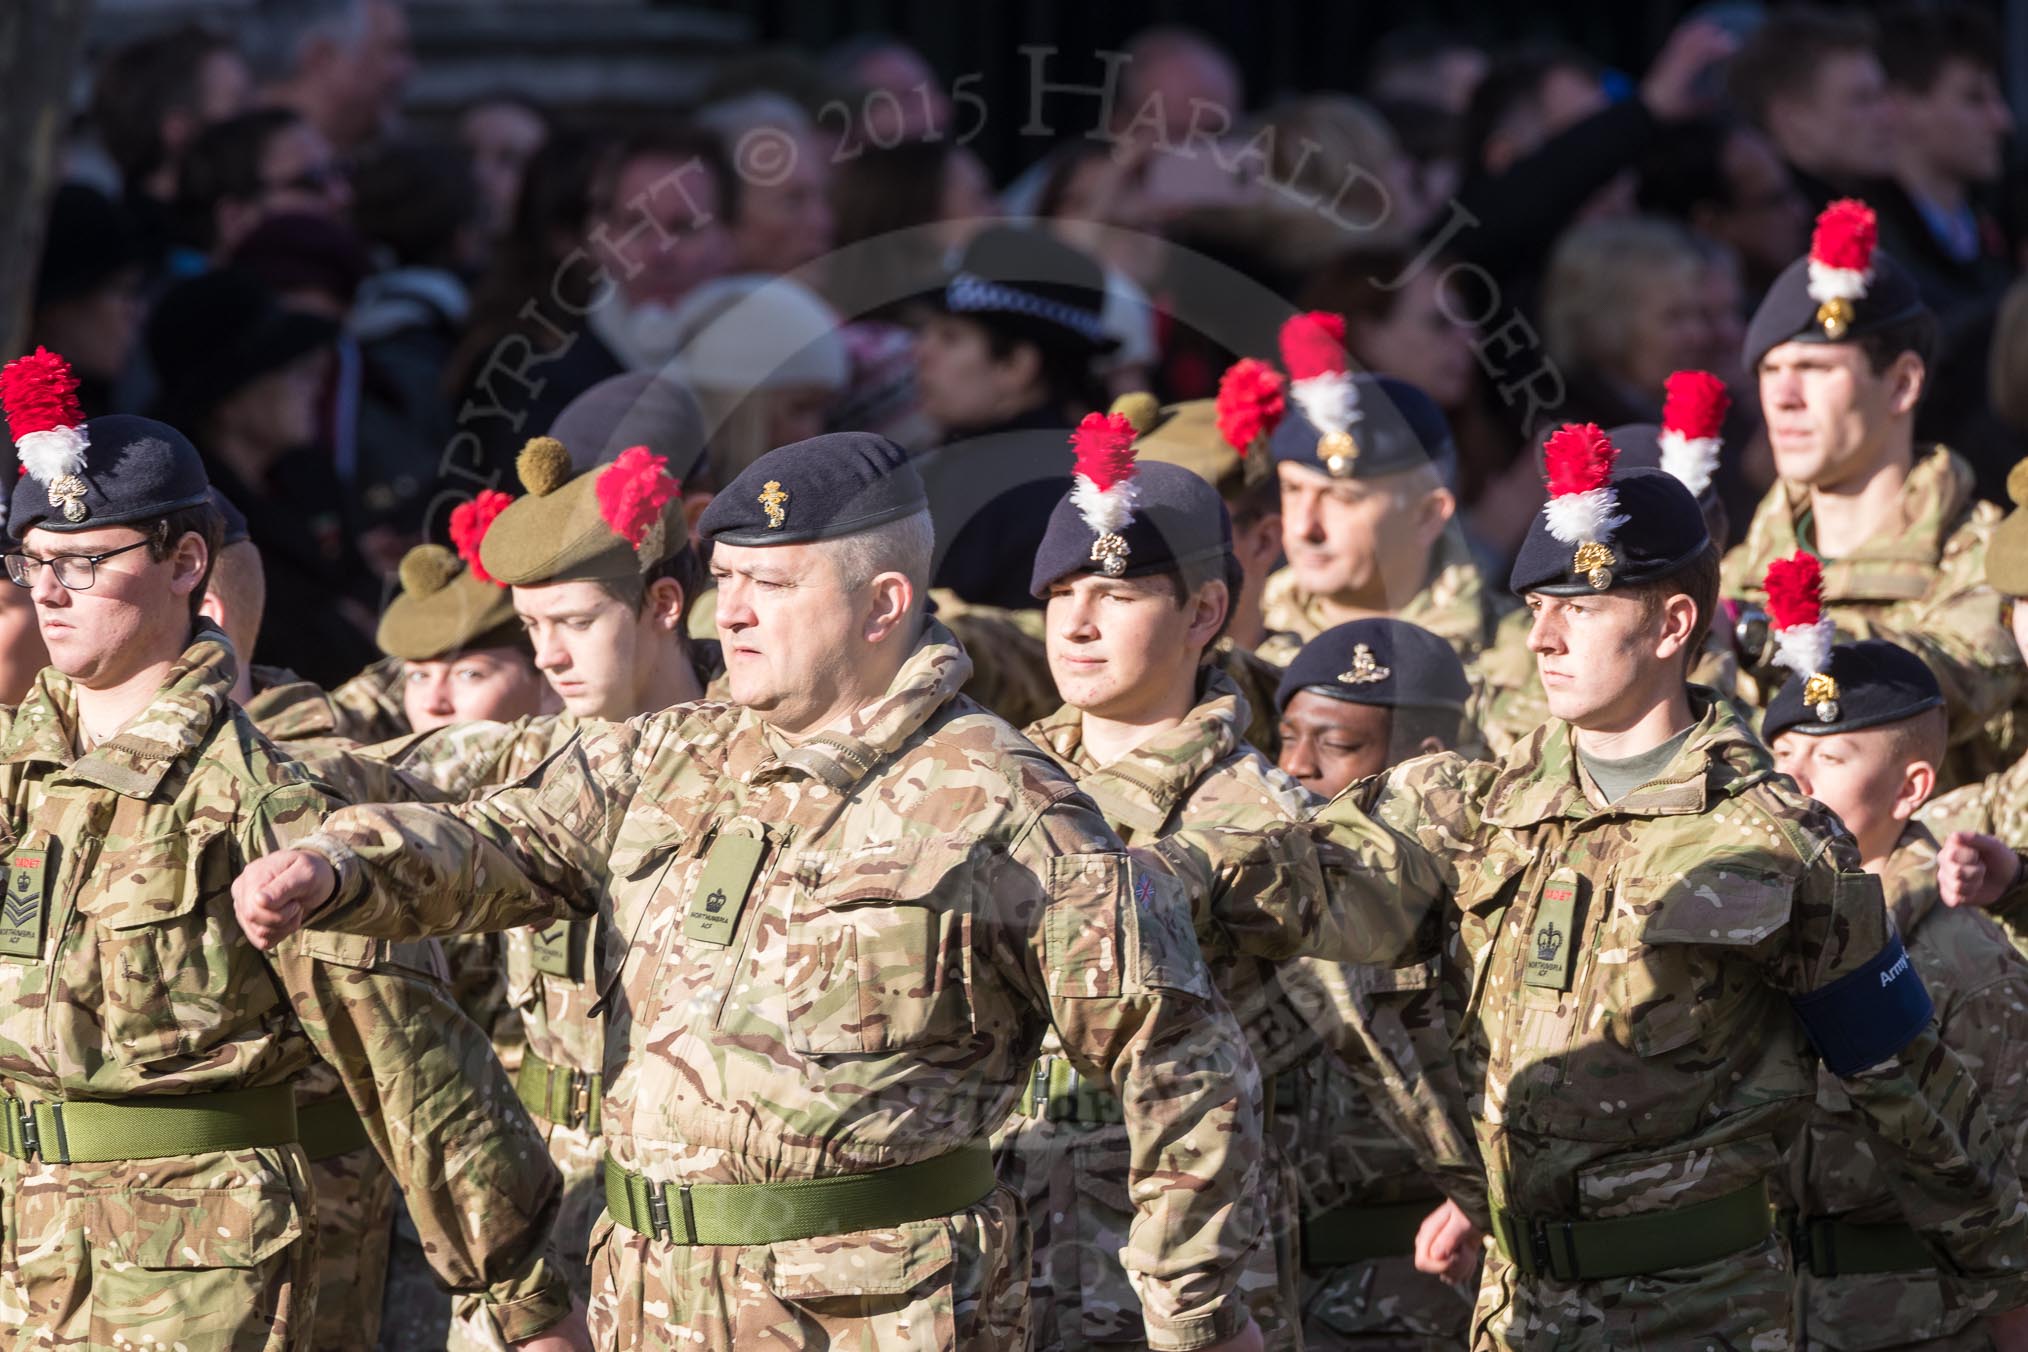 March Past, Remembrance Sunday at the Cenotaph 2016: M32 Army and combined Cadet Force.
Cenotaph, Whitehall, London SW1,
London,
Greater London,
United Kingdom,
on 13 November 2016 at 13:18, image #2821